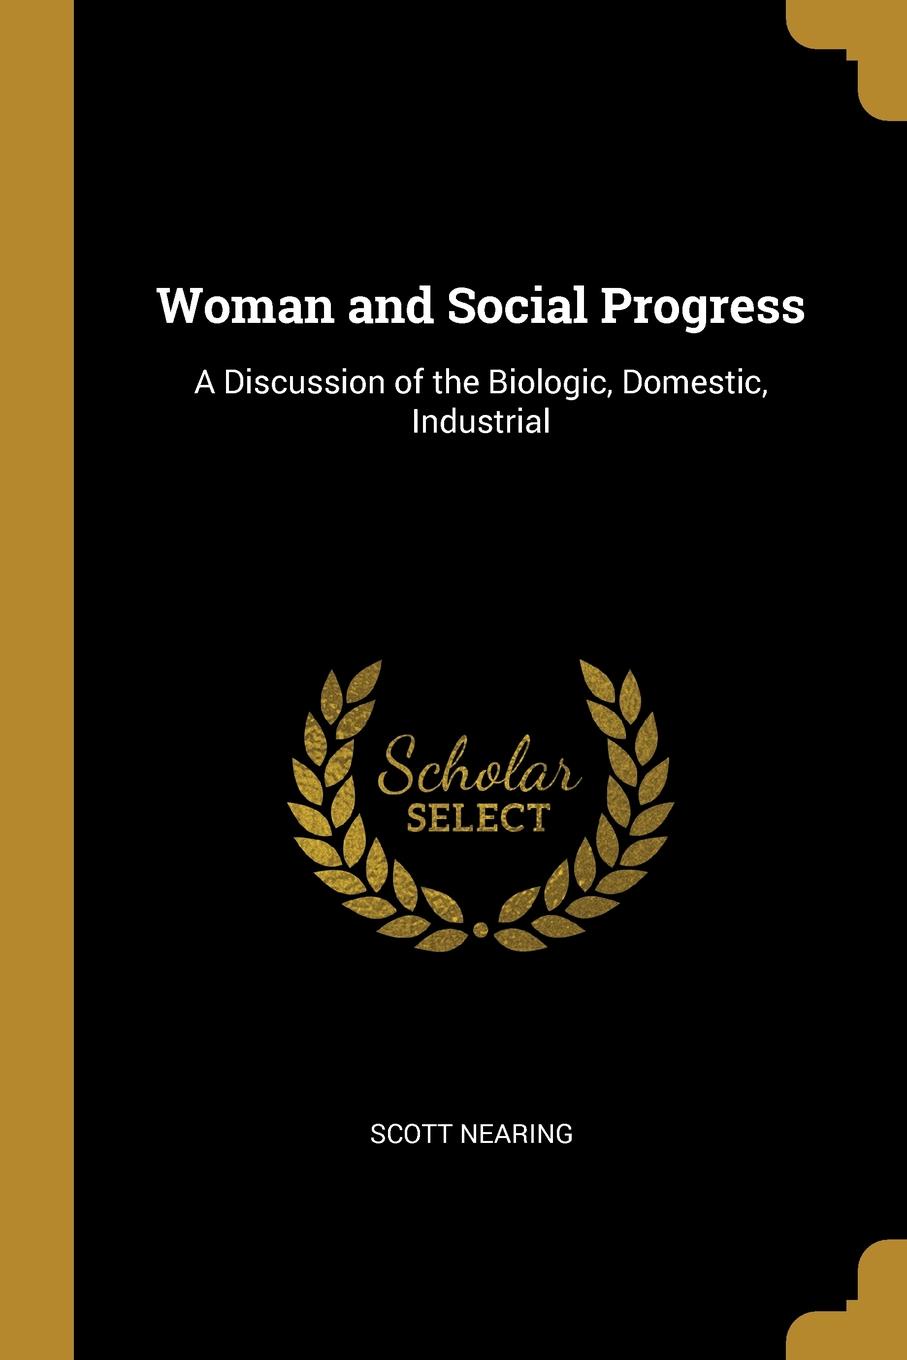 Woman and Social Progress. A Discussion of the Biologic, Domestic, Industrial